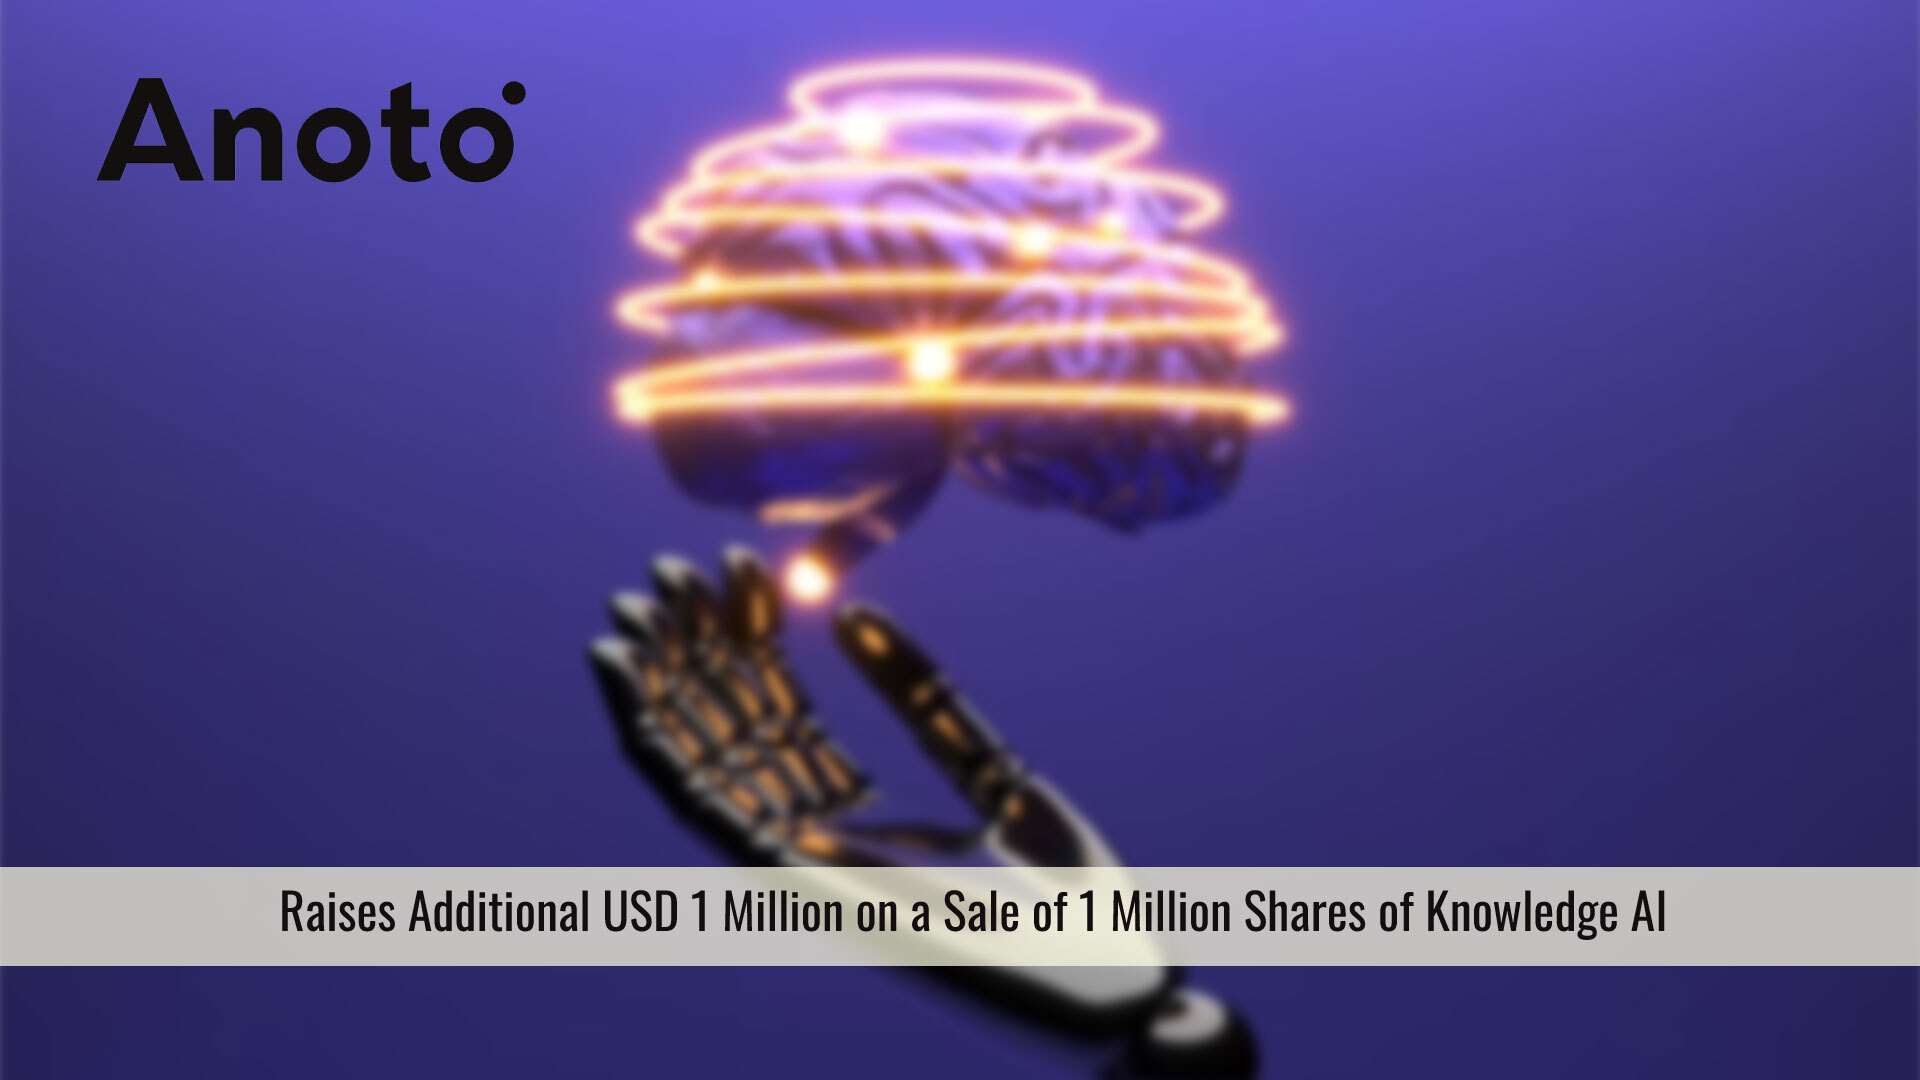 Anoto raises additional USD 1 million on a sale of 1 million shares of Knowledge AI to further improve financial strength